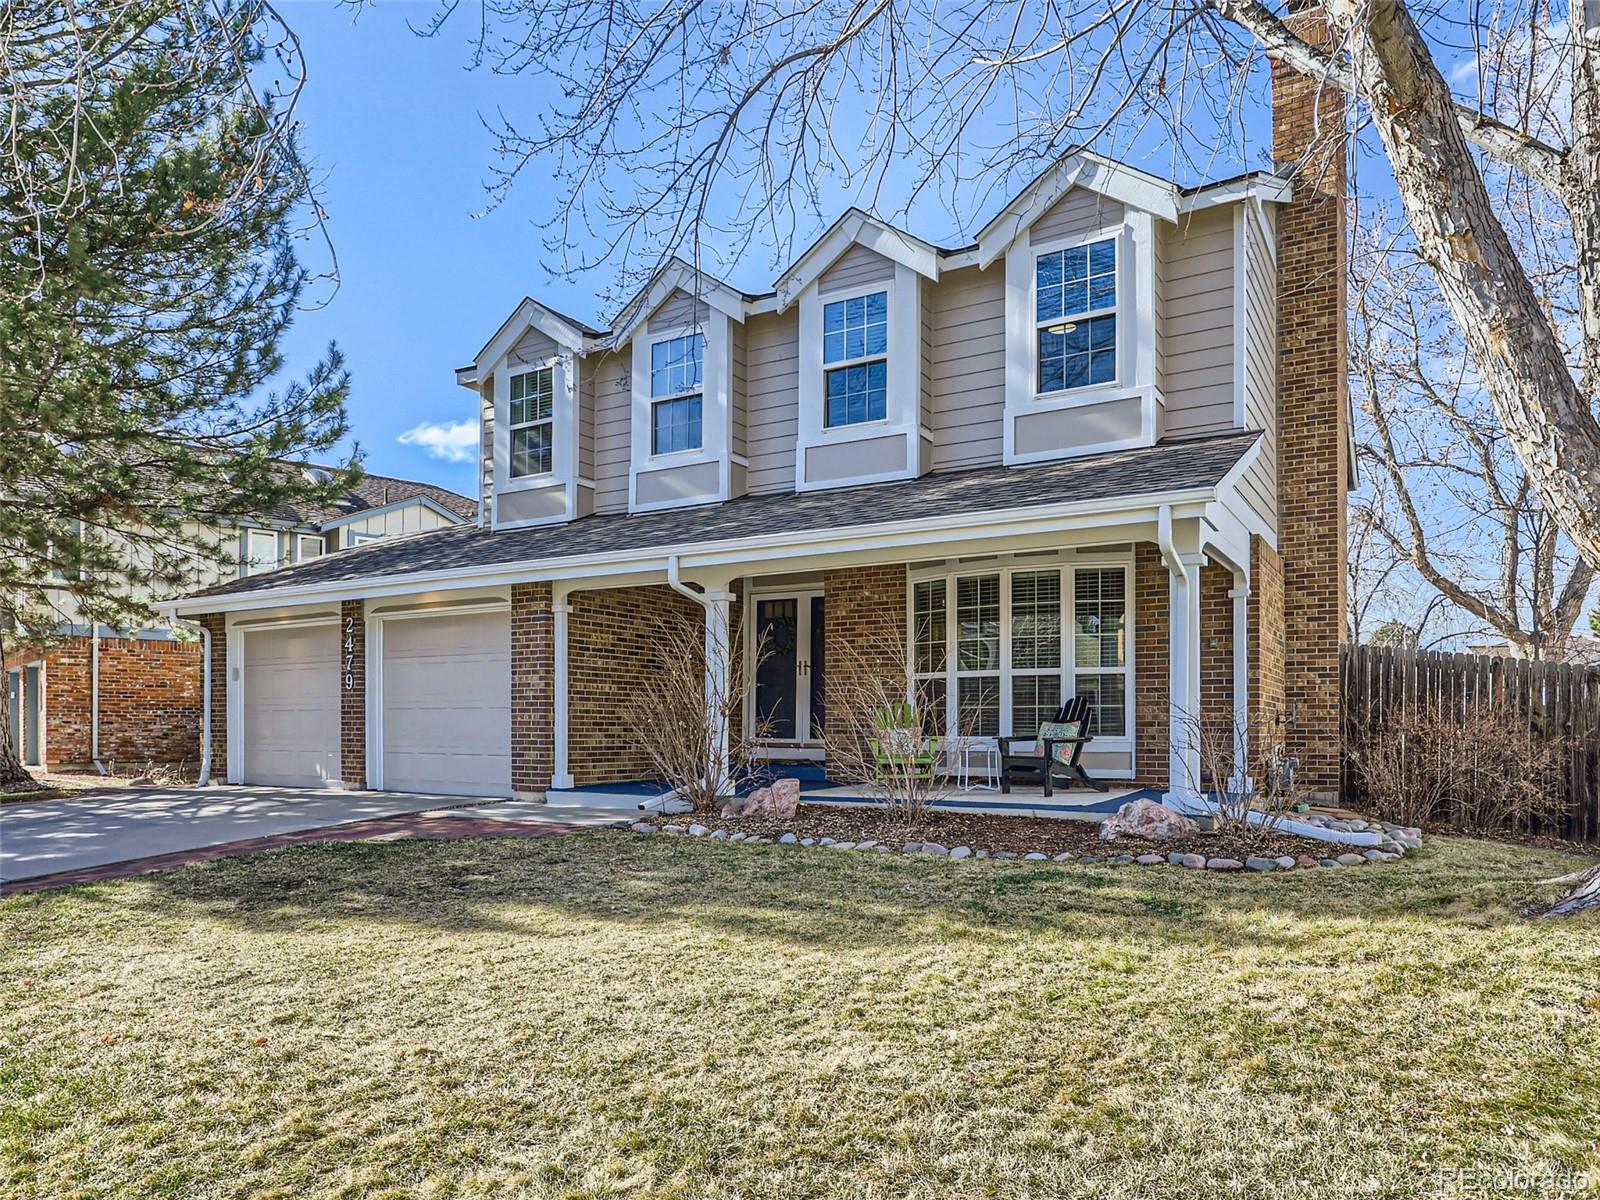 2479 w long circle, littleton sold home. Closed on 2024-03-29 for $850,000.